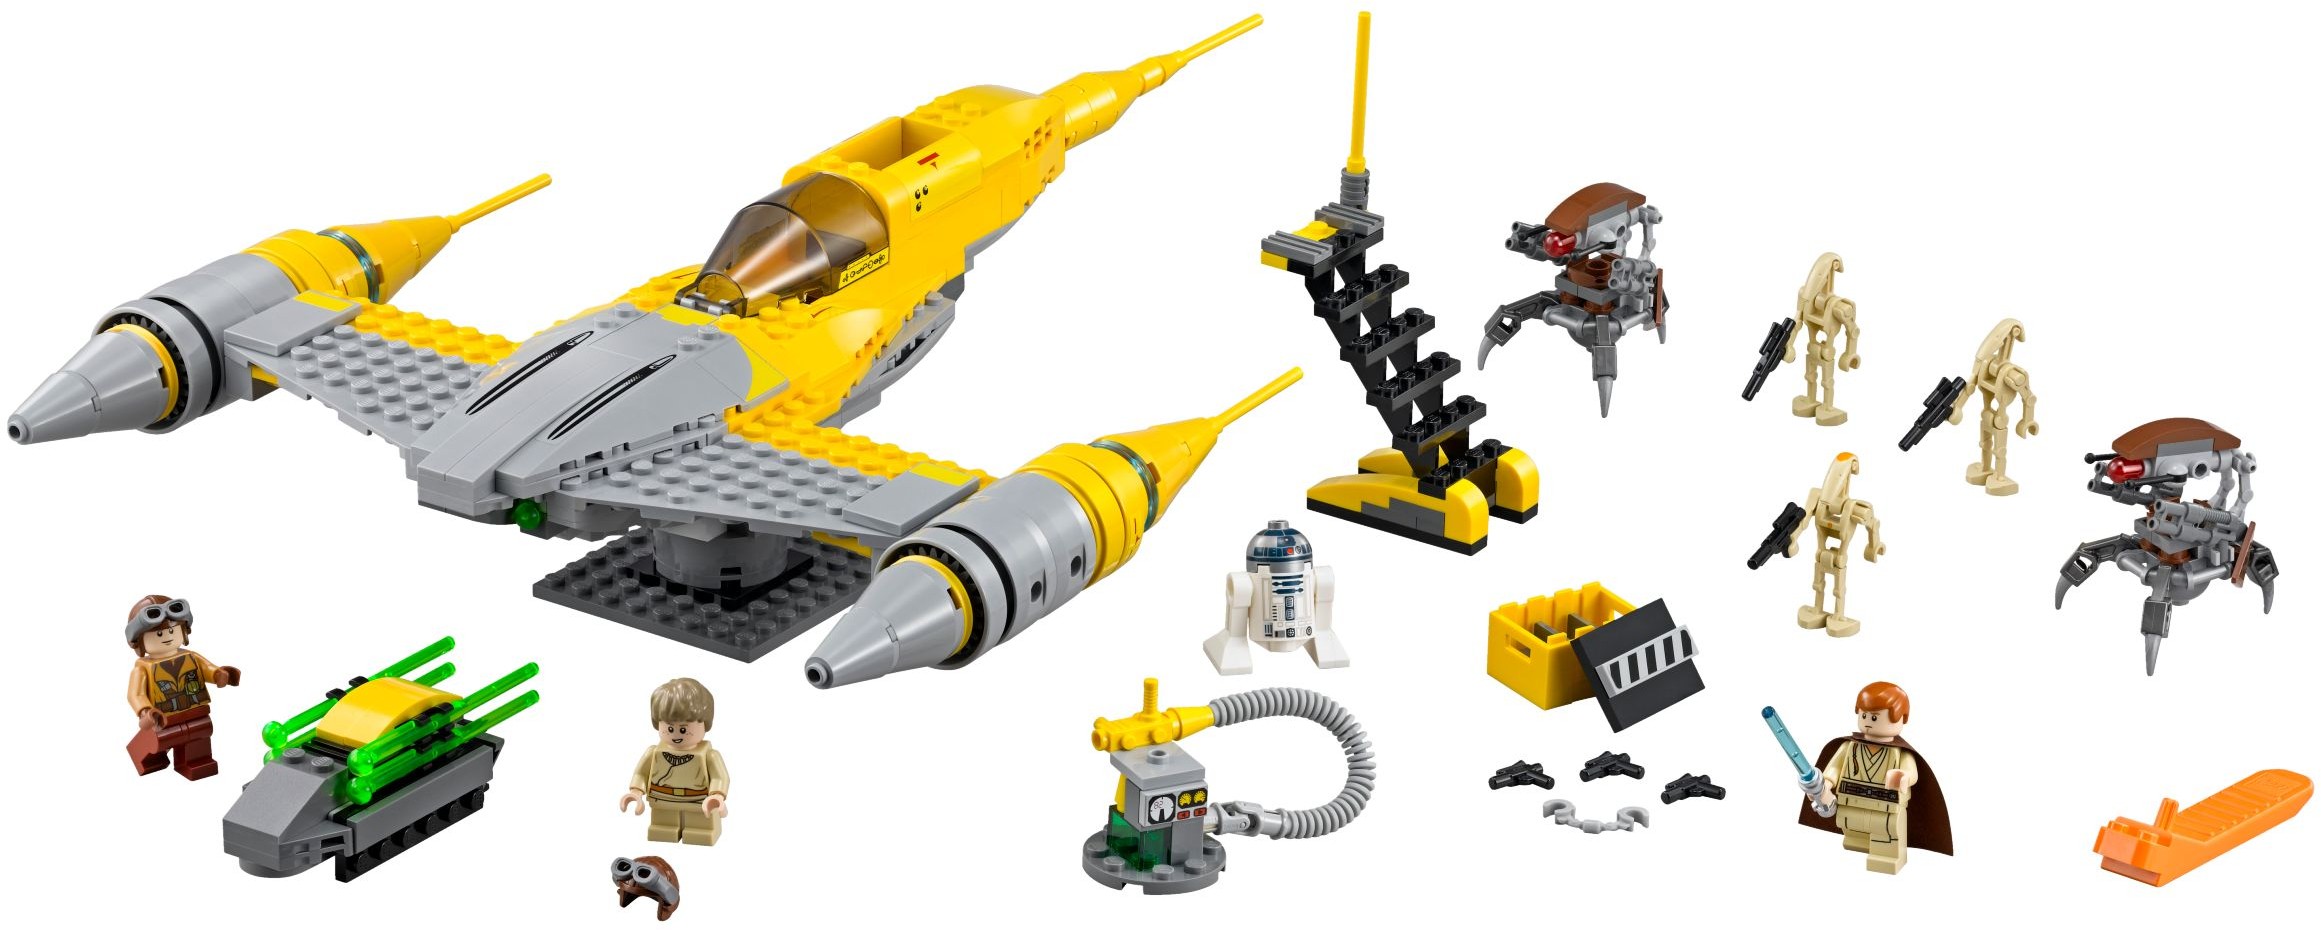 Worst LEGO Sets of All Time